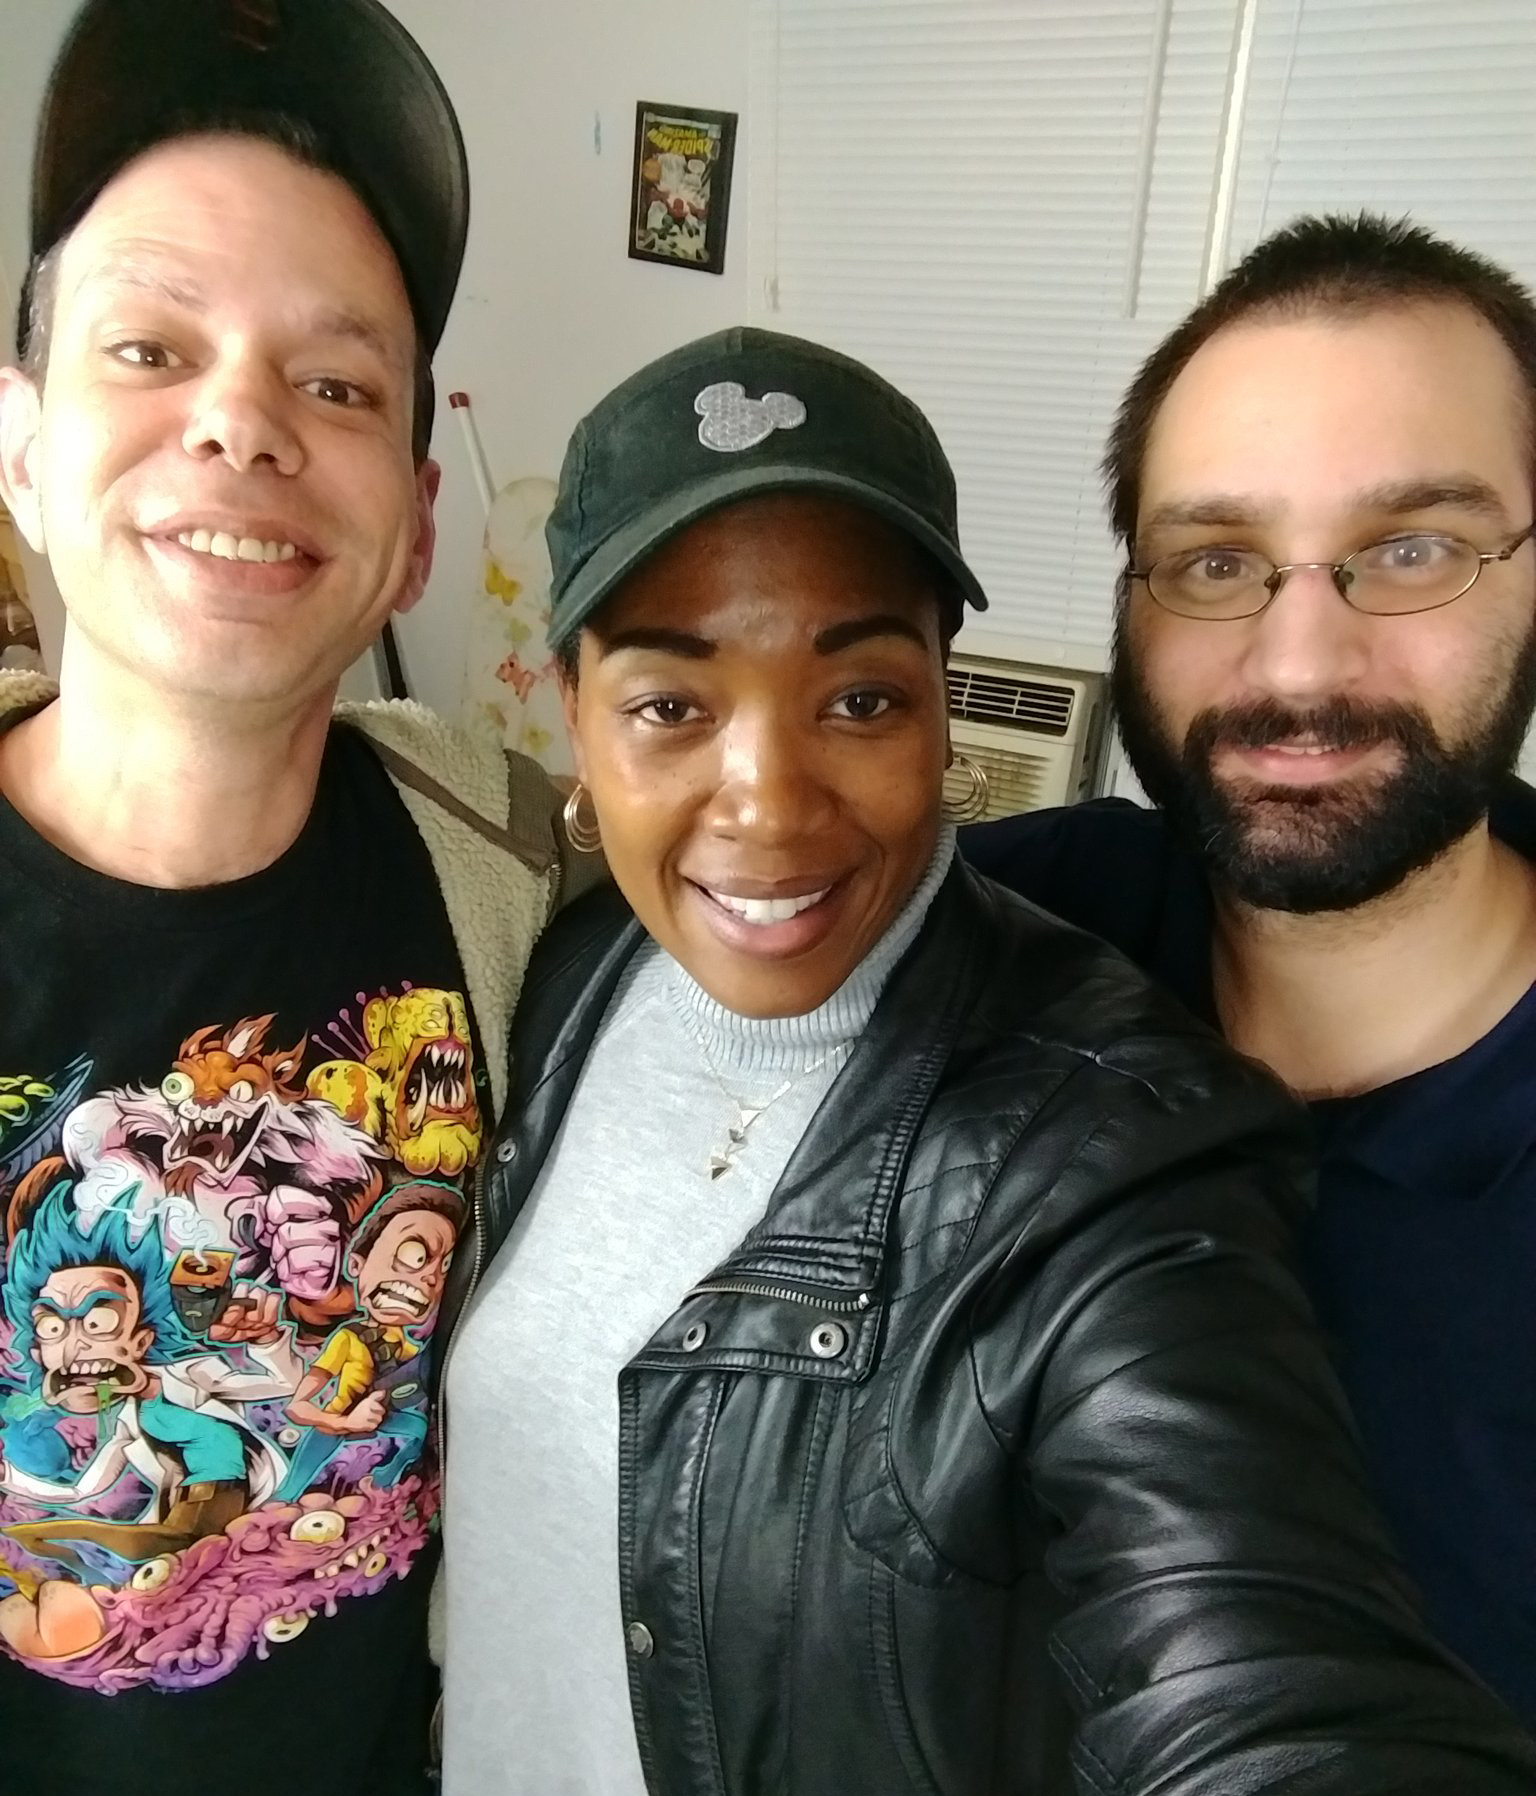 #143 LaTice LIVE, Mike Ricca from 3 People Like This, David The Producer, Aphrodite The Oracle Of L.A., Gio from Consensually Speaking With Gio, & John Louis Campbell